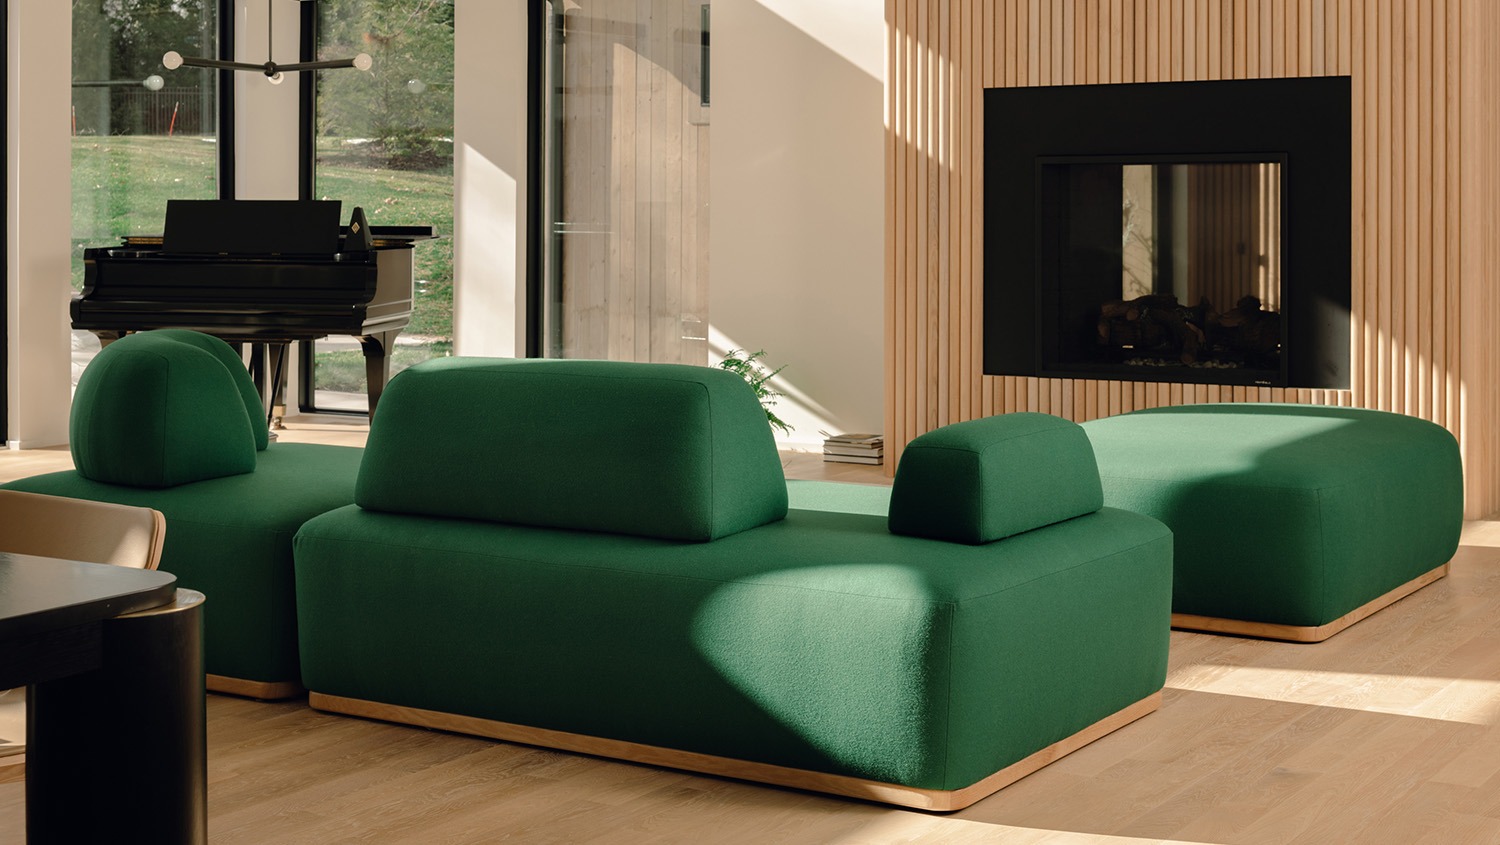 Image: Green Floyd Magna sectional in a brightly lit room with wood floors